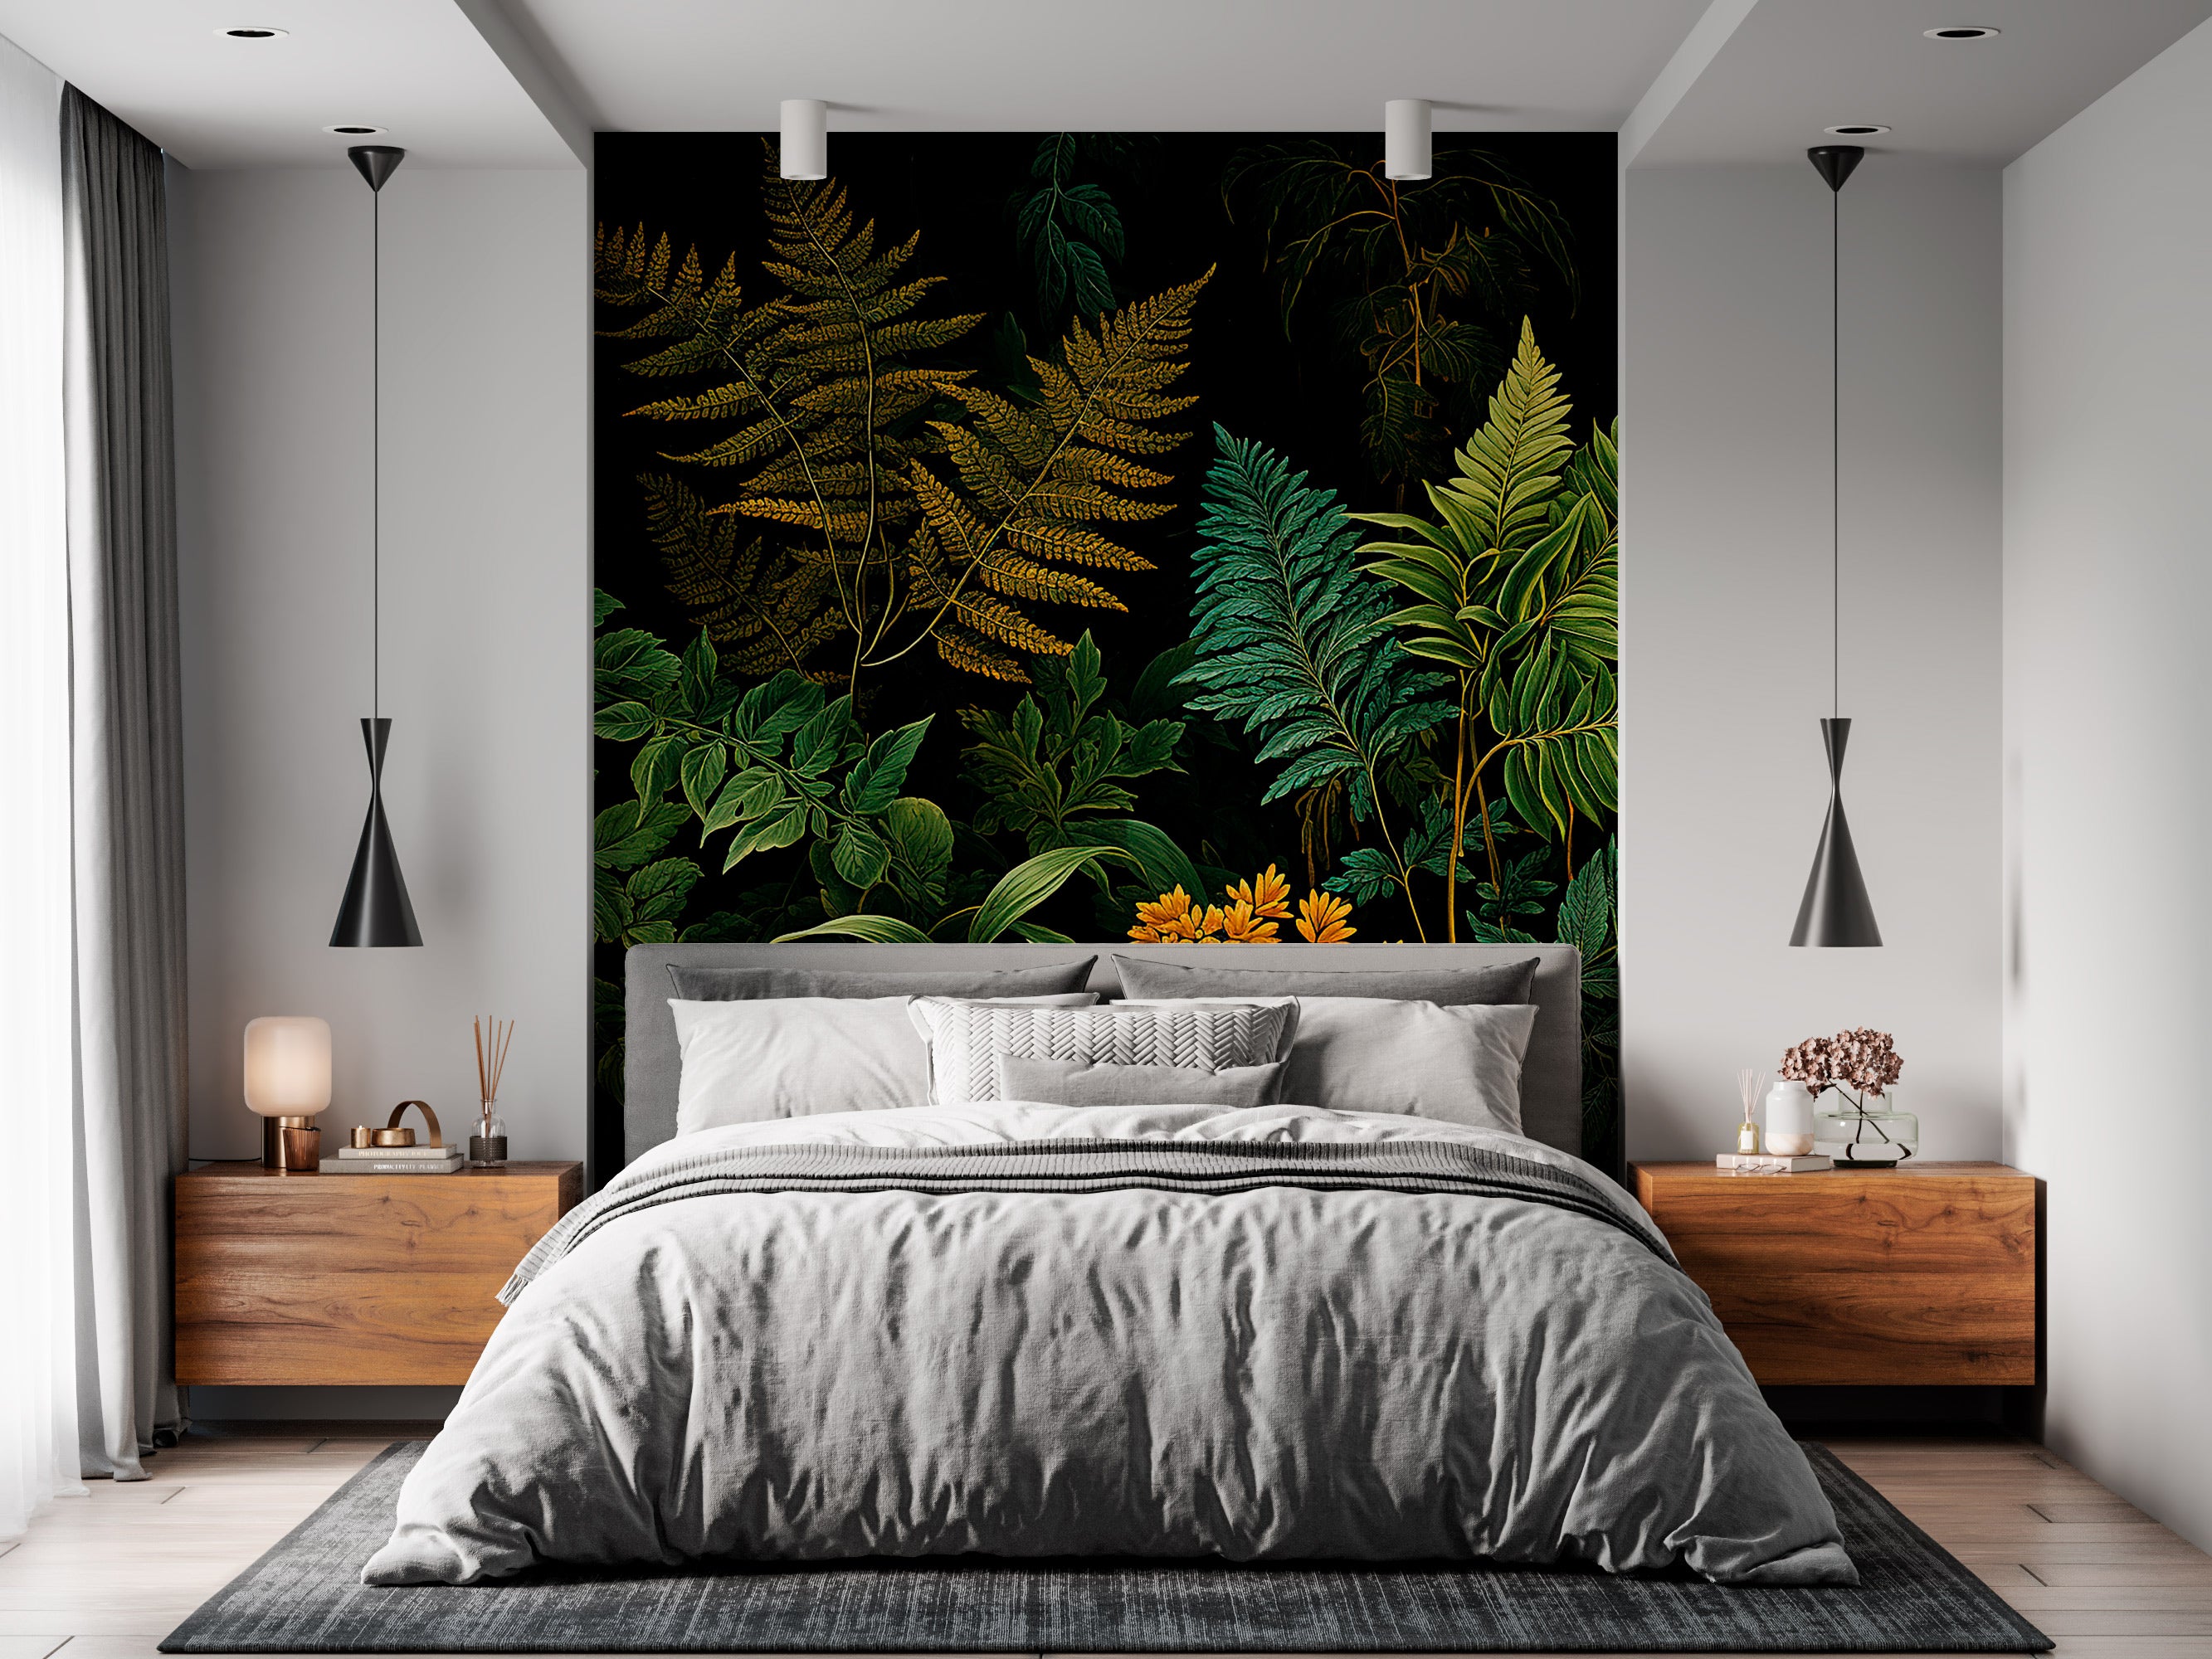 Fern Leaves Wall Decor for a Verdant Home Ambiance"